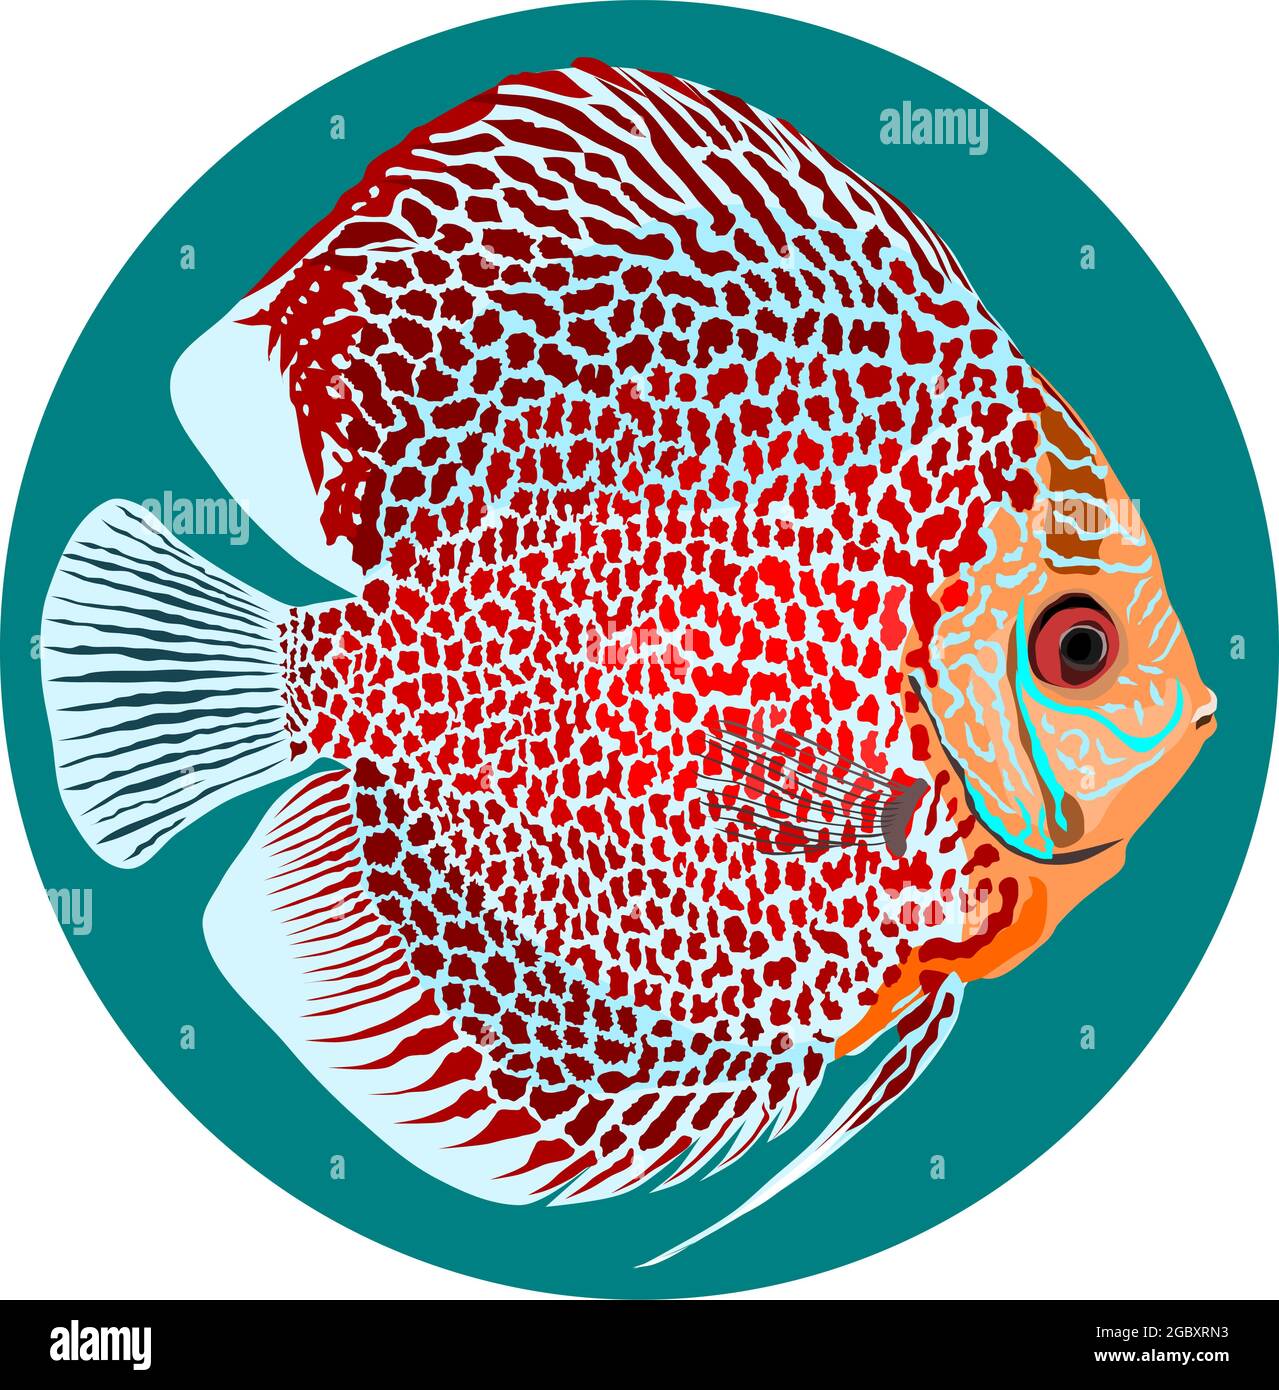 vector illustration of a leopard skin discus fish Stock Vector